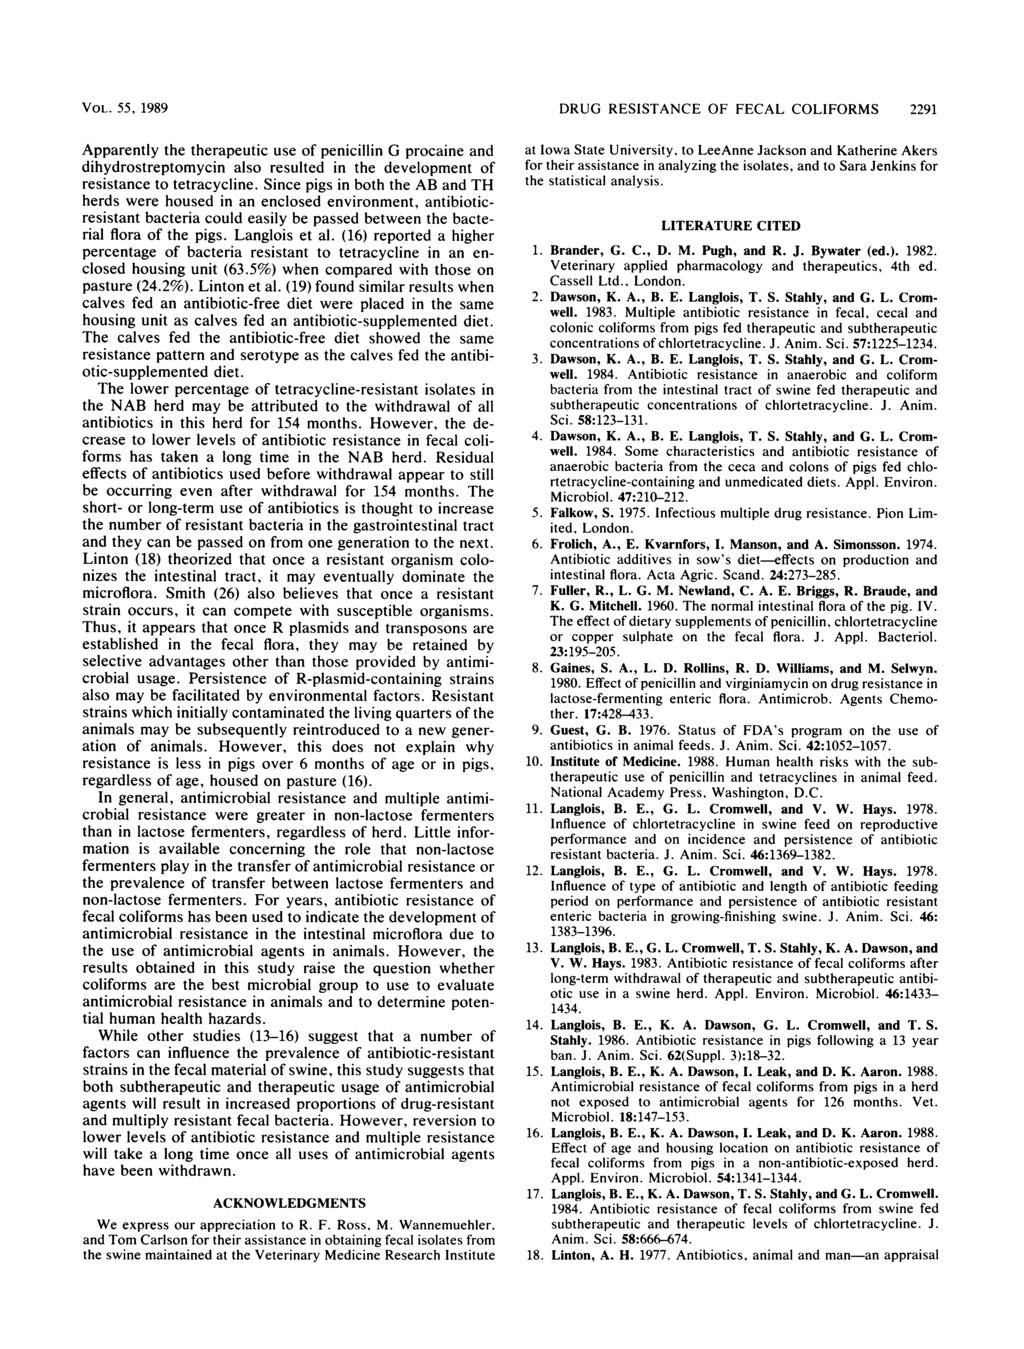 VOL. 55, 1989 Apparently the therapeutic use of penicillin G procaine and dihydrostreptomycin also resulted in the development of resistance to tetracycline.